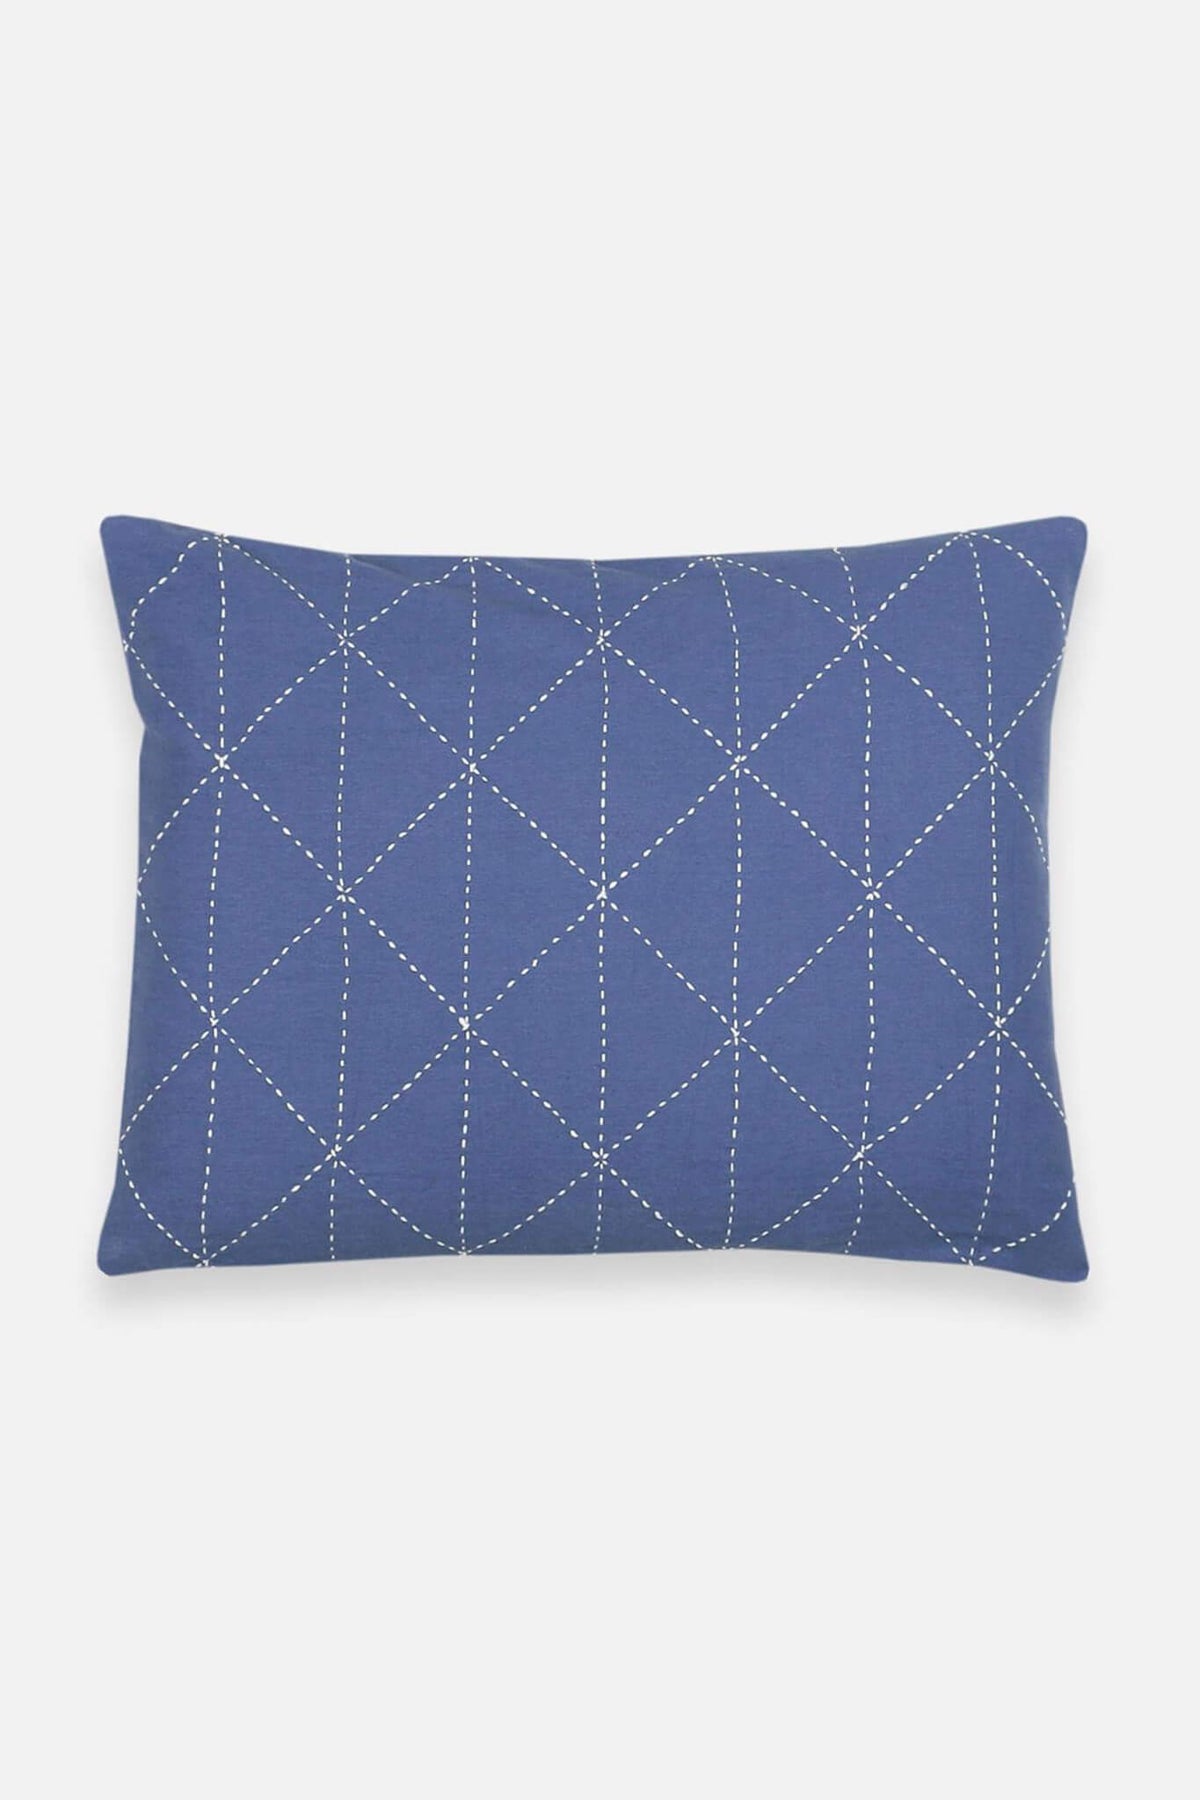 Anchal Project Small Graph Throw Pillow Cover